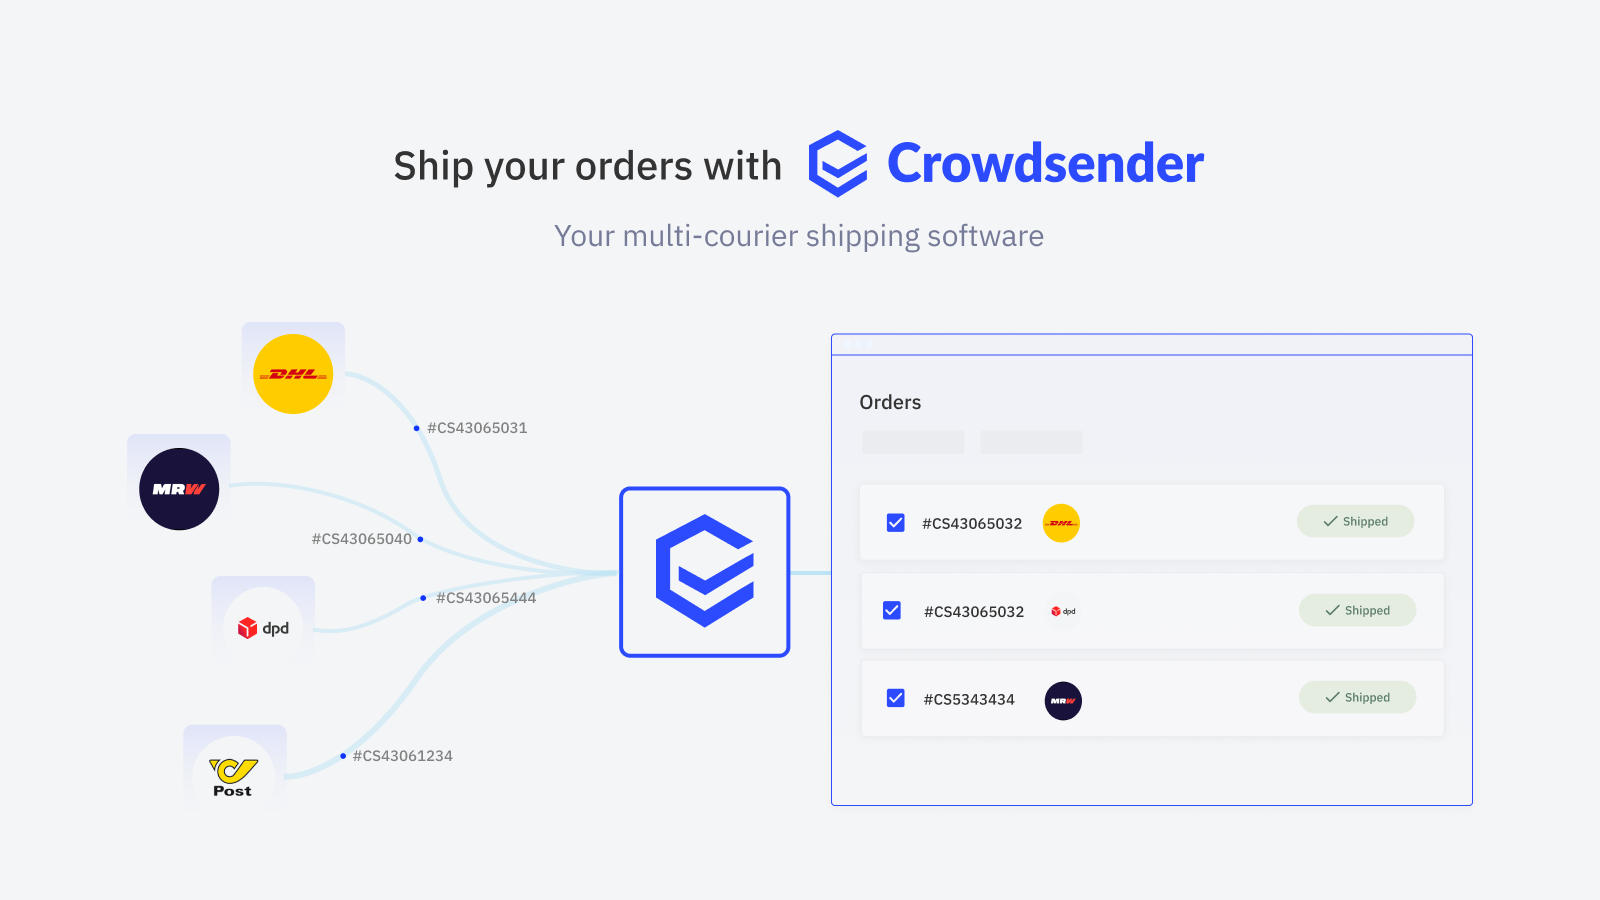 Ship your orders with Crowdsender